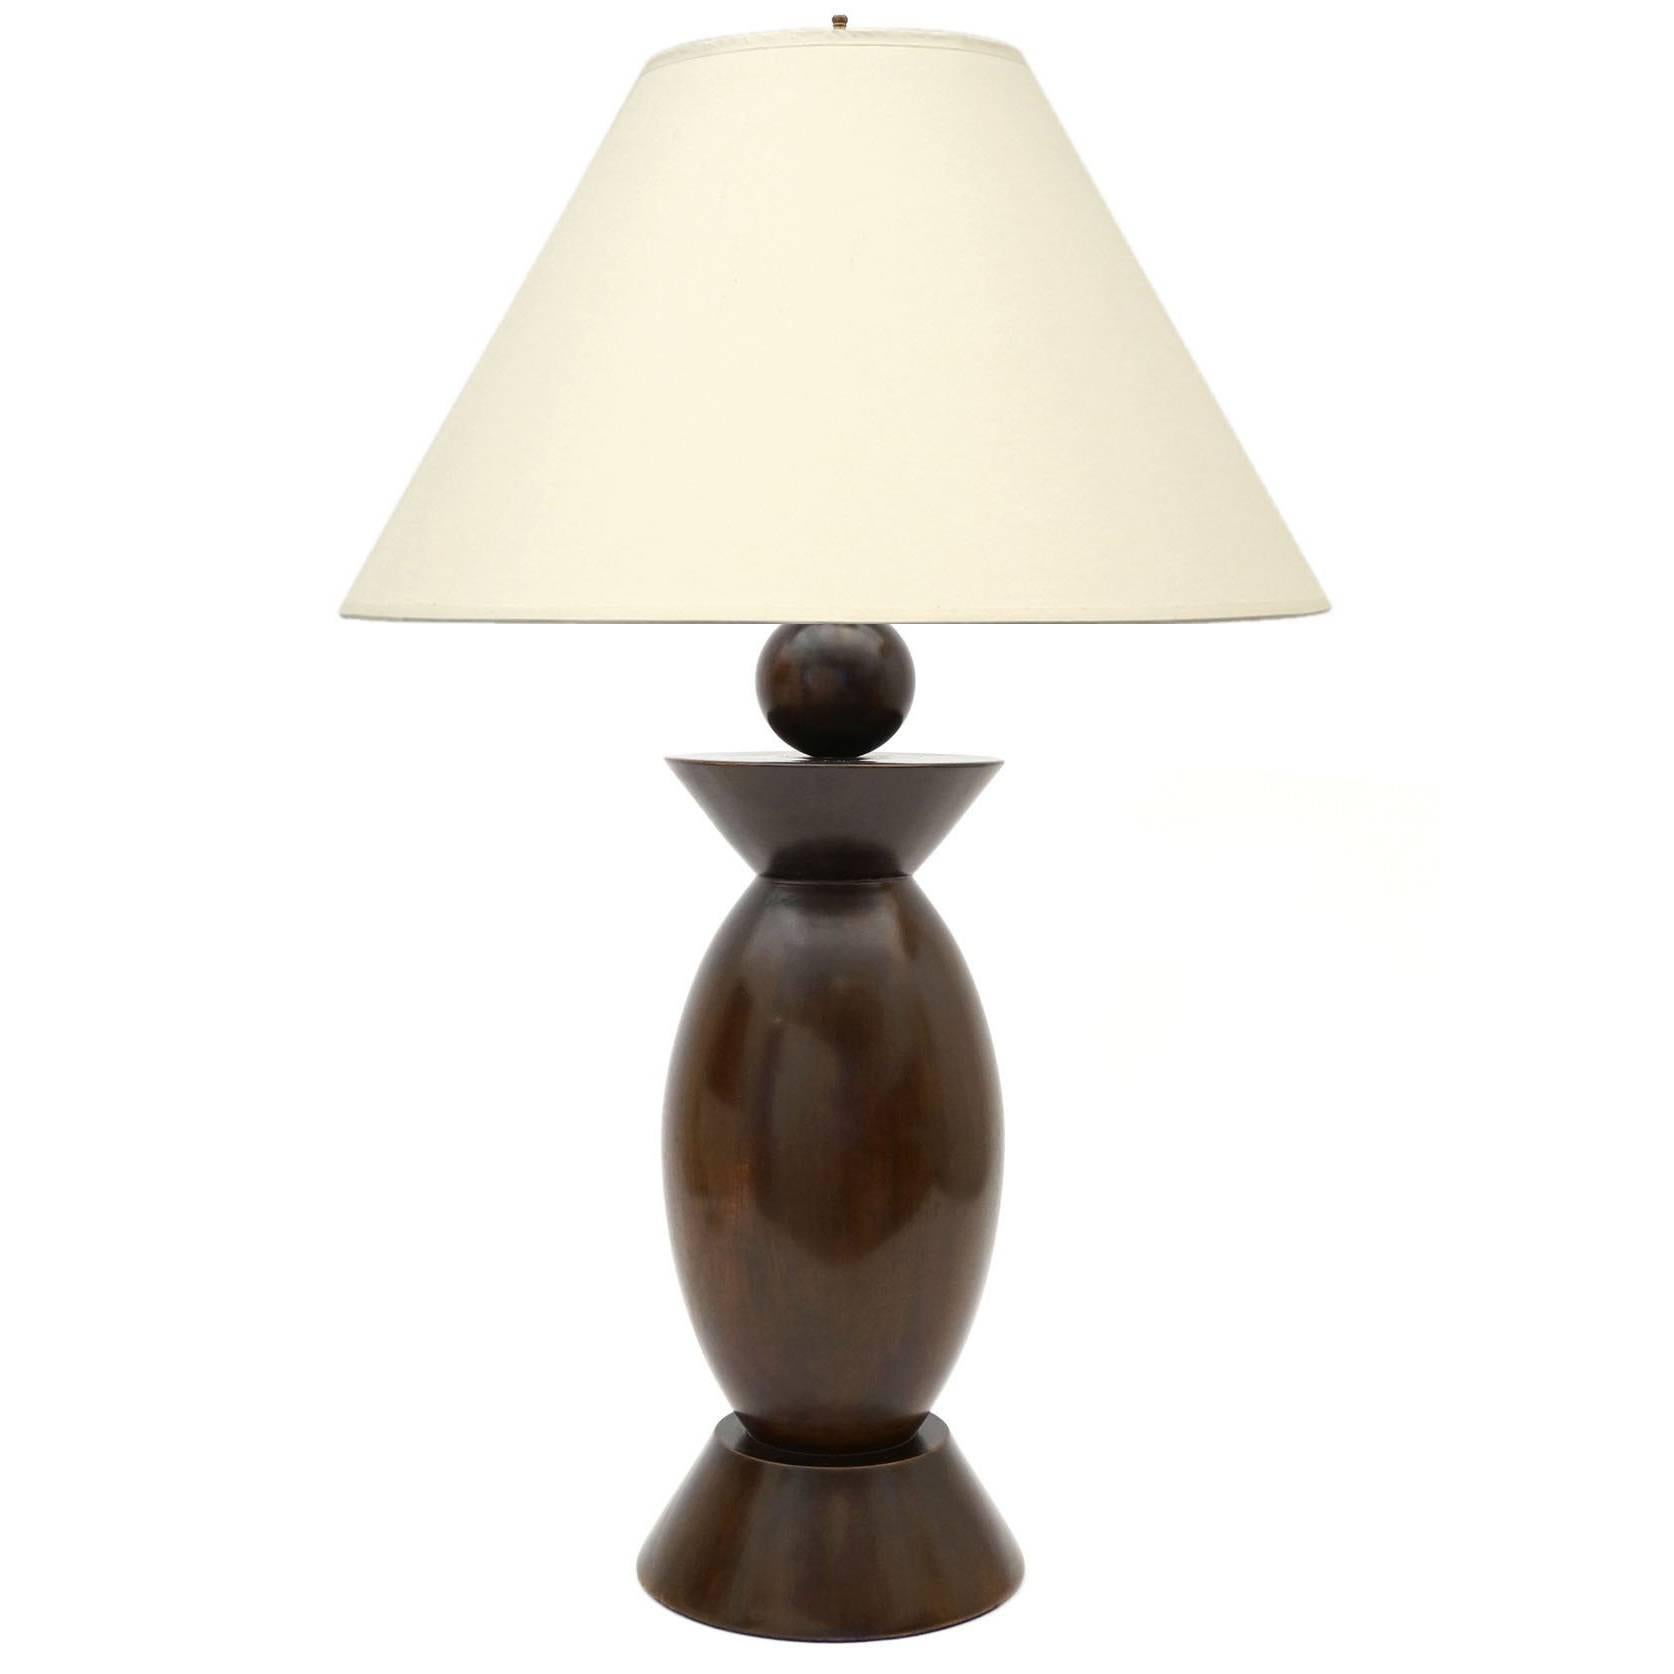 Turned Wood Table Lamp with Ball Detail, France, circa 1940